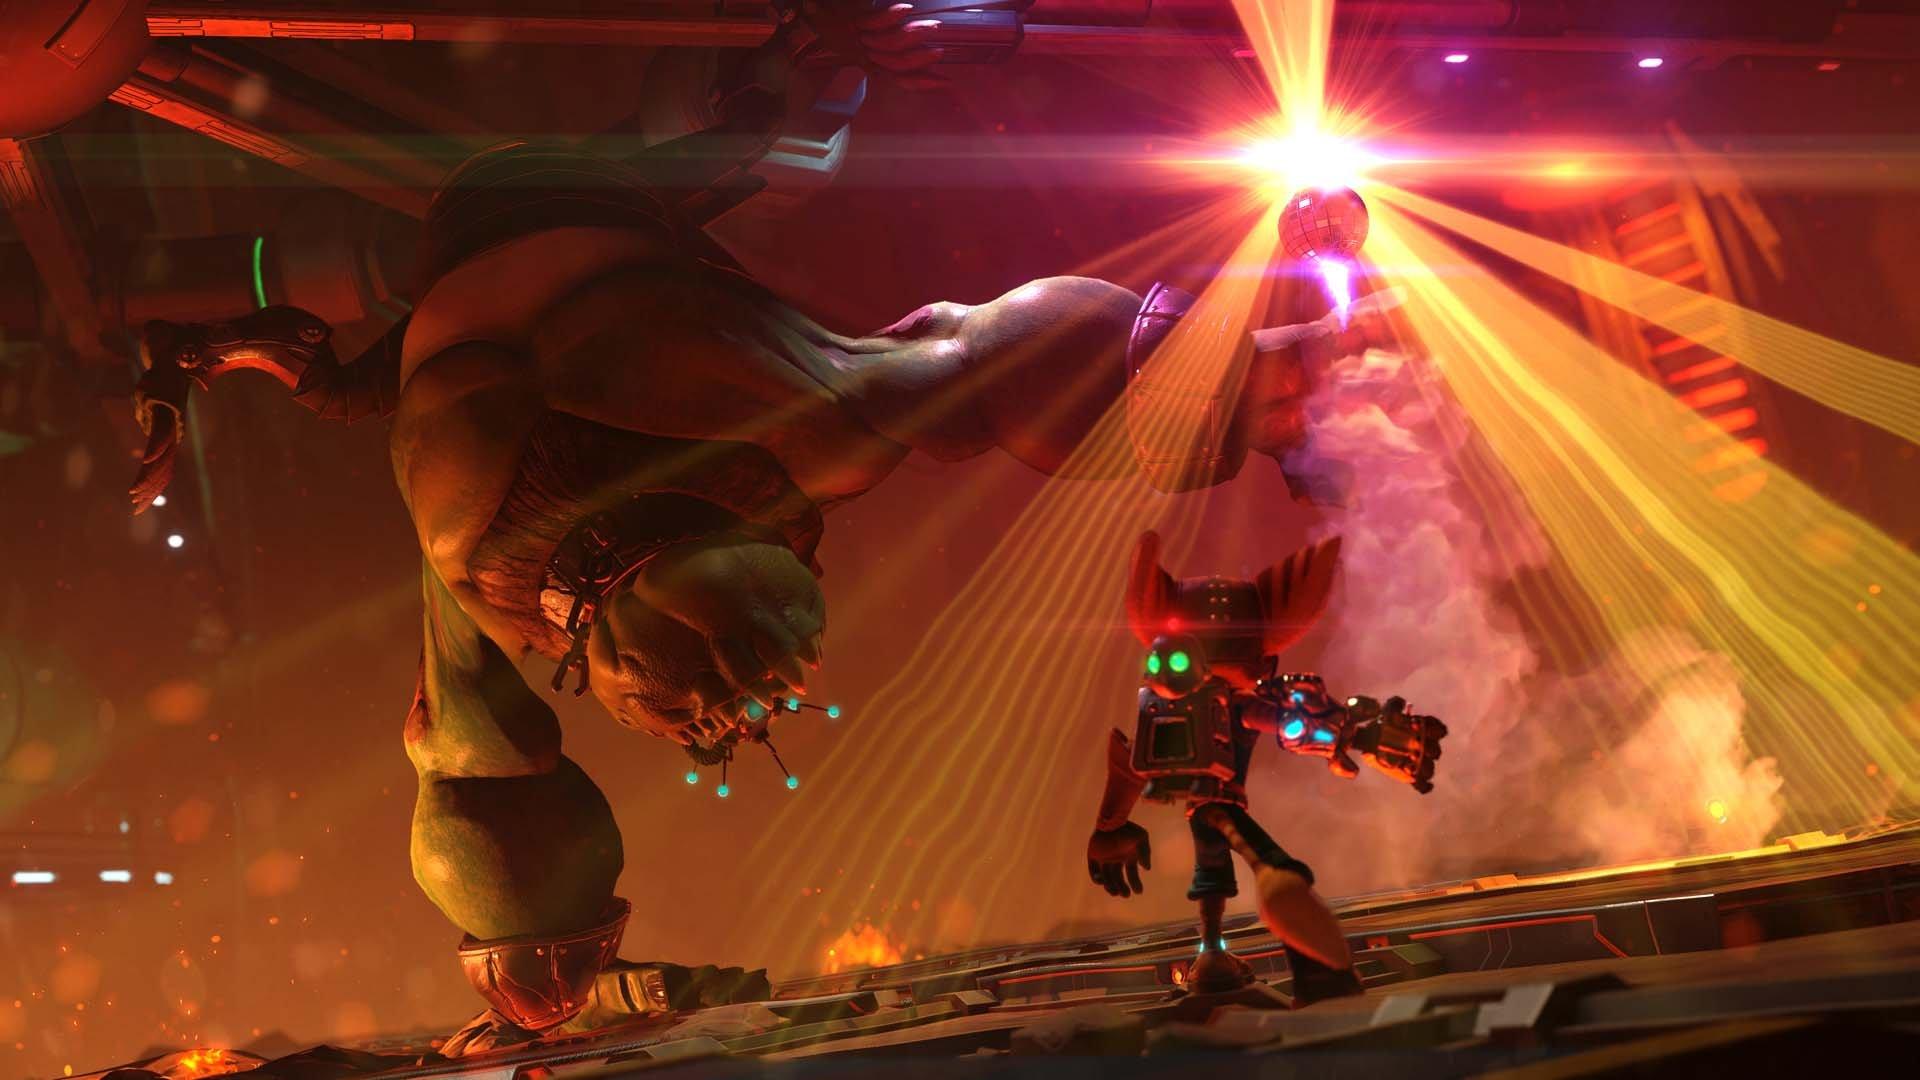 Ratchet and Clank - PlayStation 2, PlayStation 2